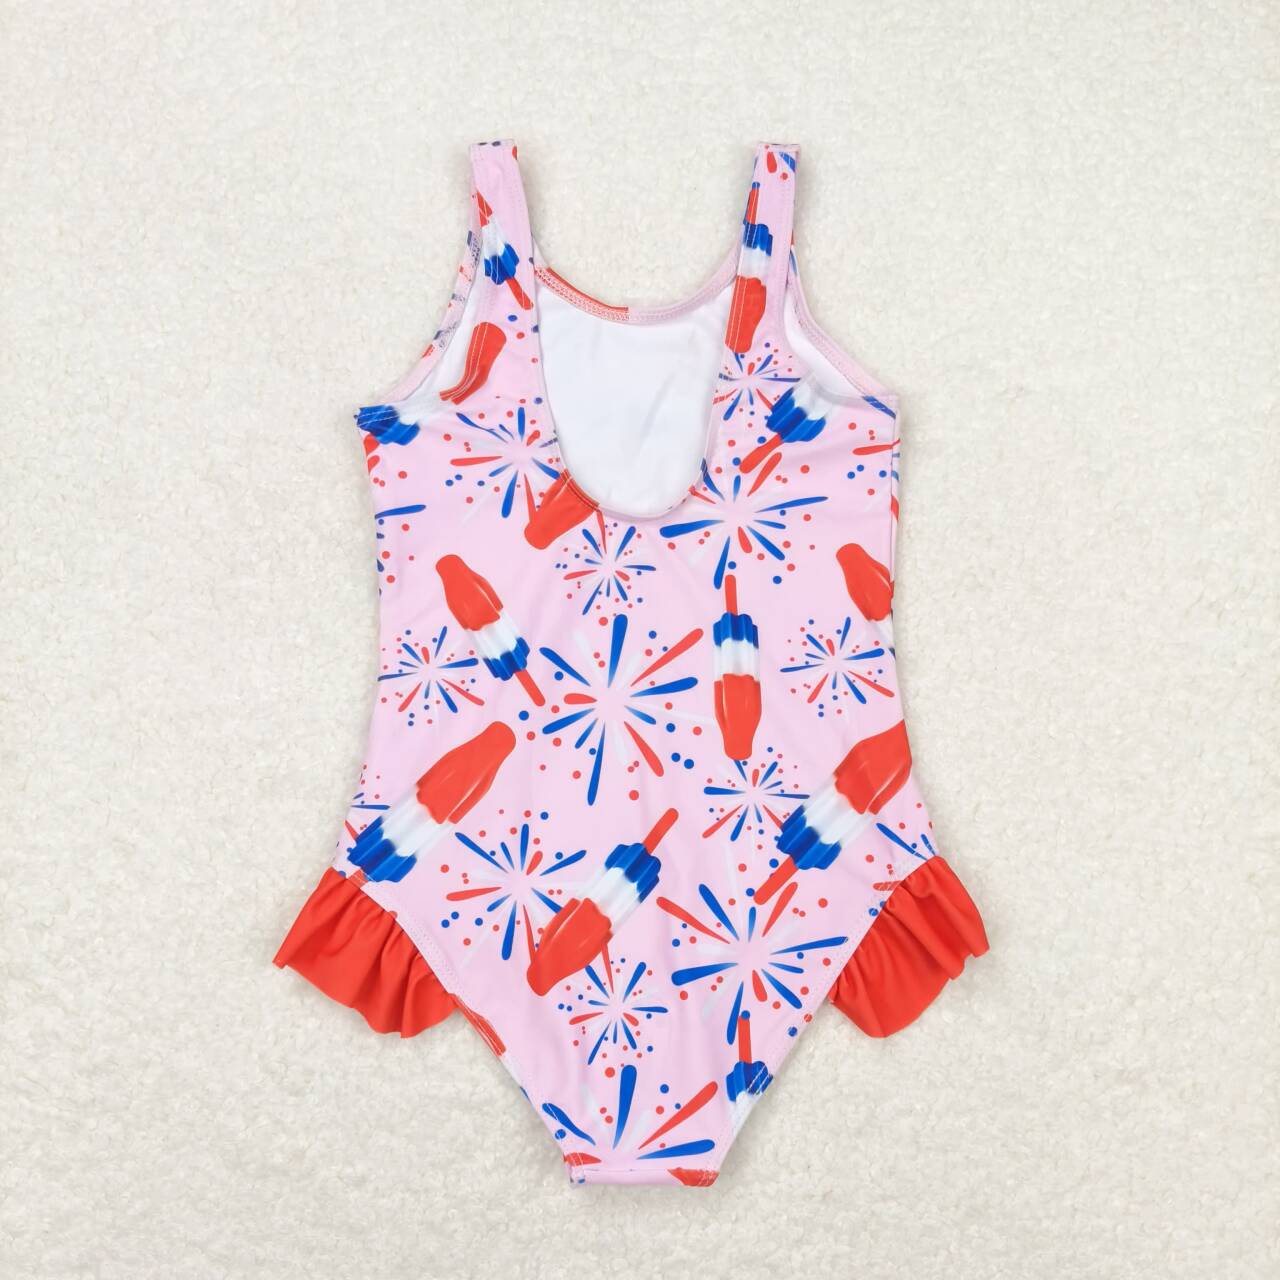 S0333 Fireworks Popsicle Pink Print Girls 1 Piece 4th of July Swimsuits